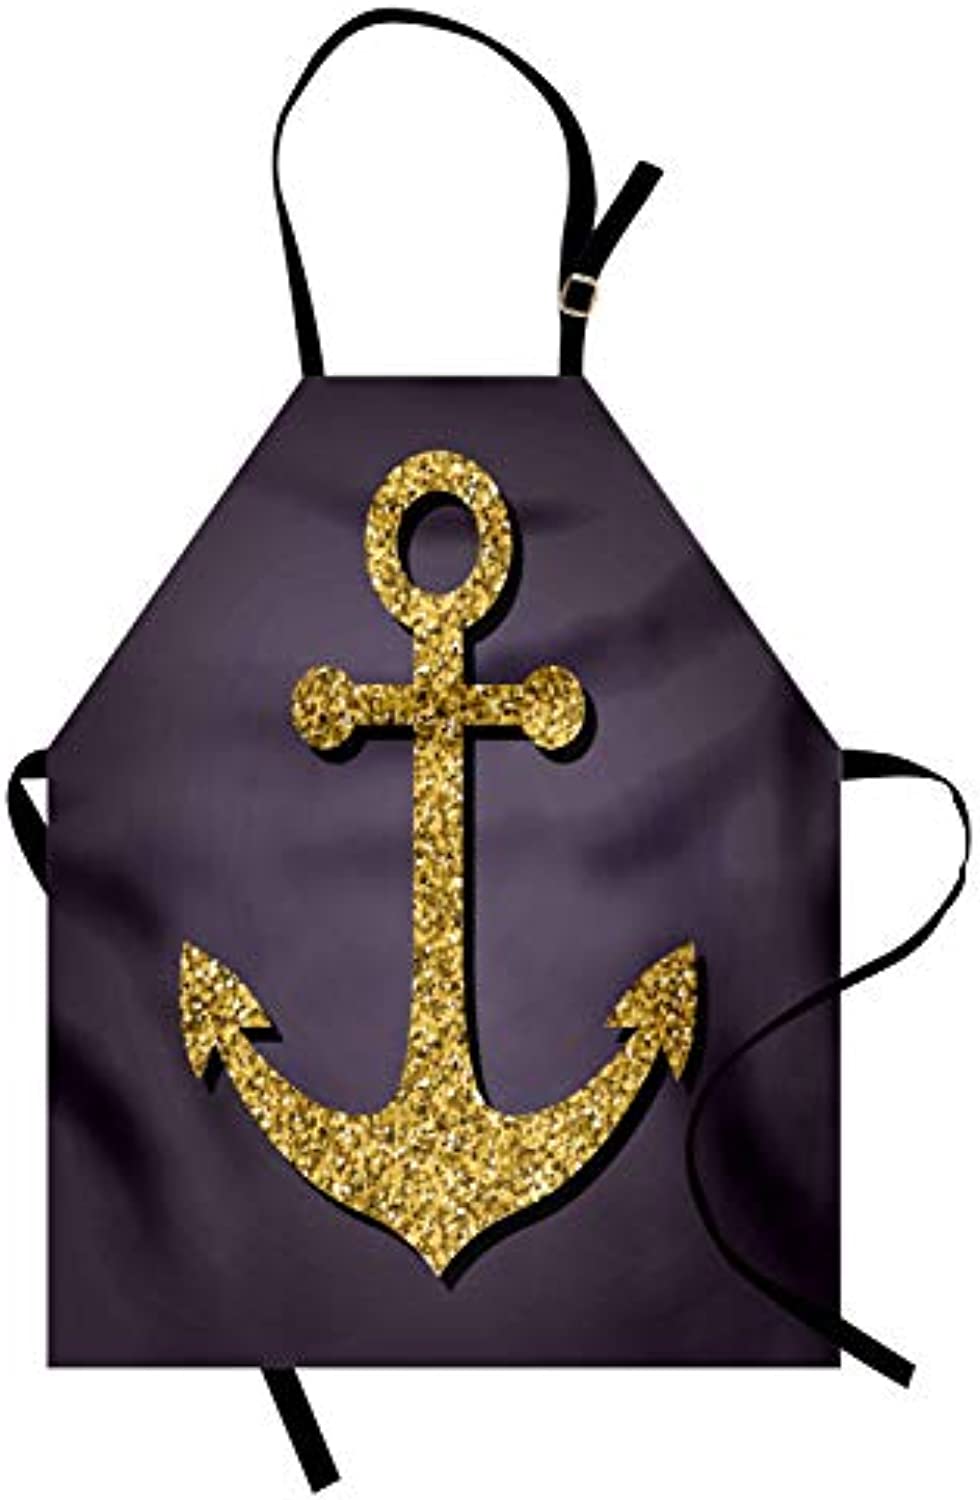 Granbey Anchor Apron  Marine Pattern Tranquility Peacefulness Display Nautical Marine Print  Unisex Kitchen Bib with Adjustable Neck for Cooking Gardening  Adult Size  Plum Yellow